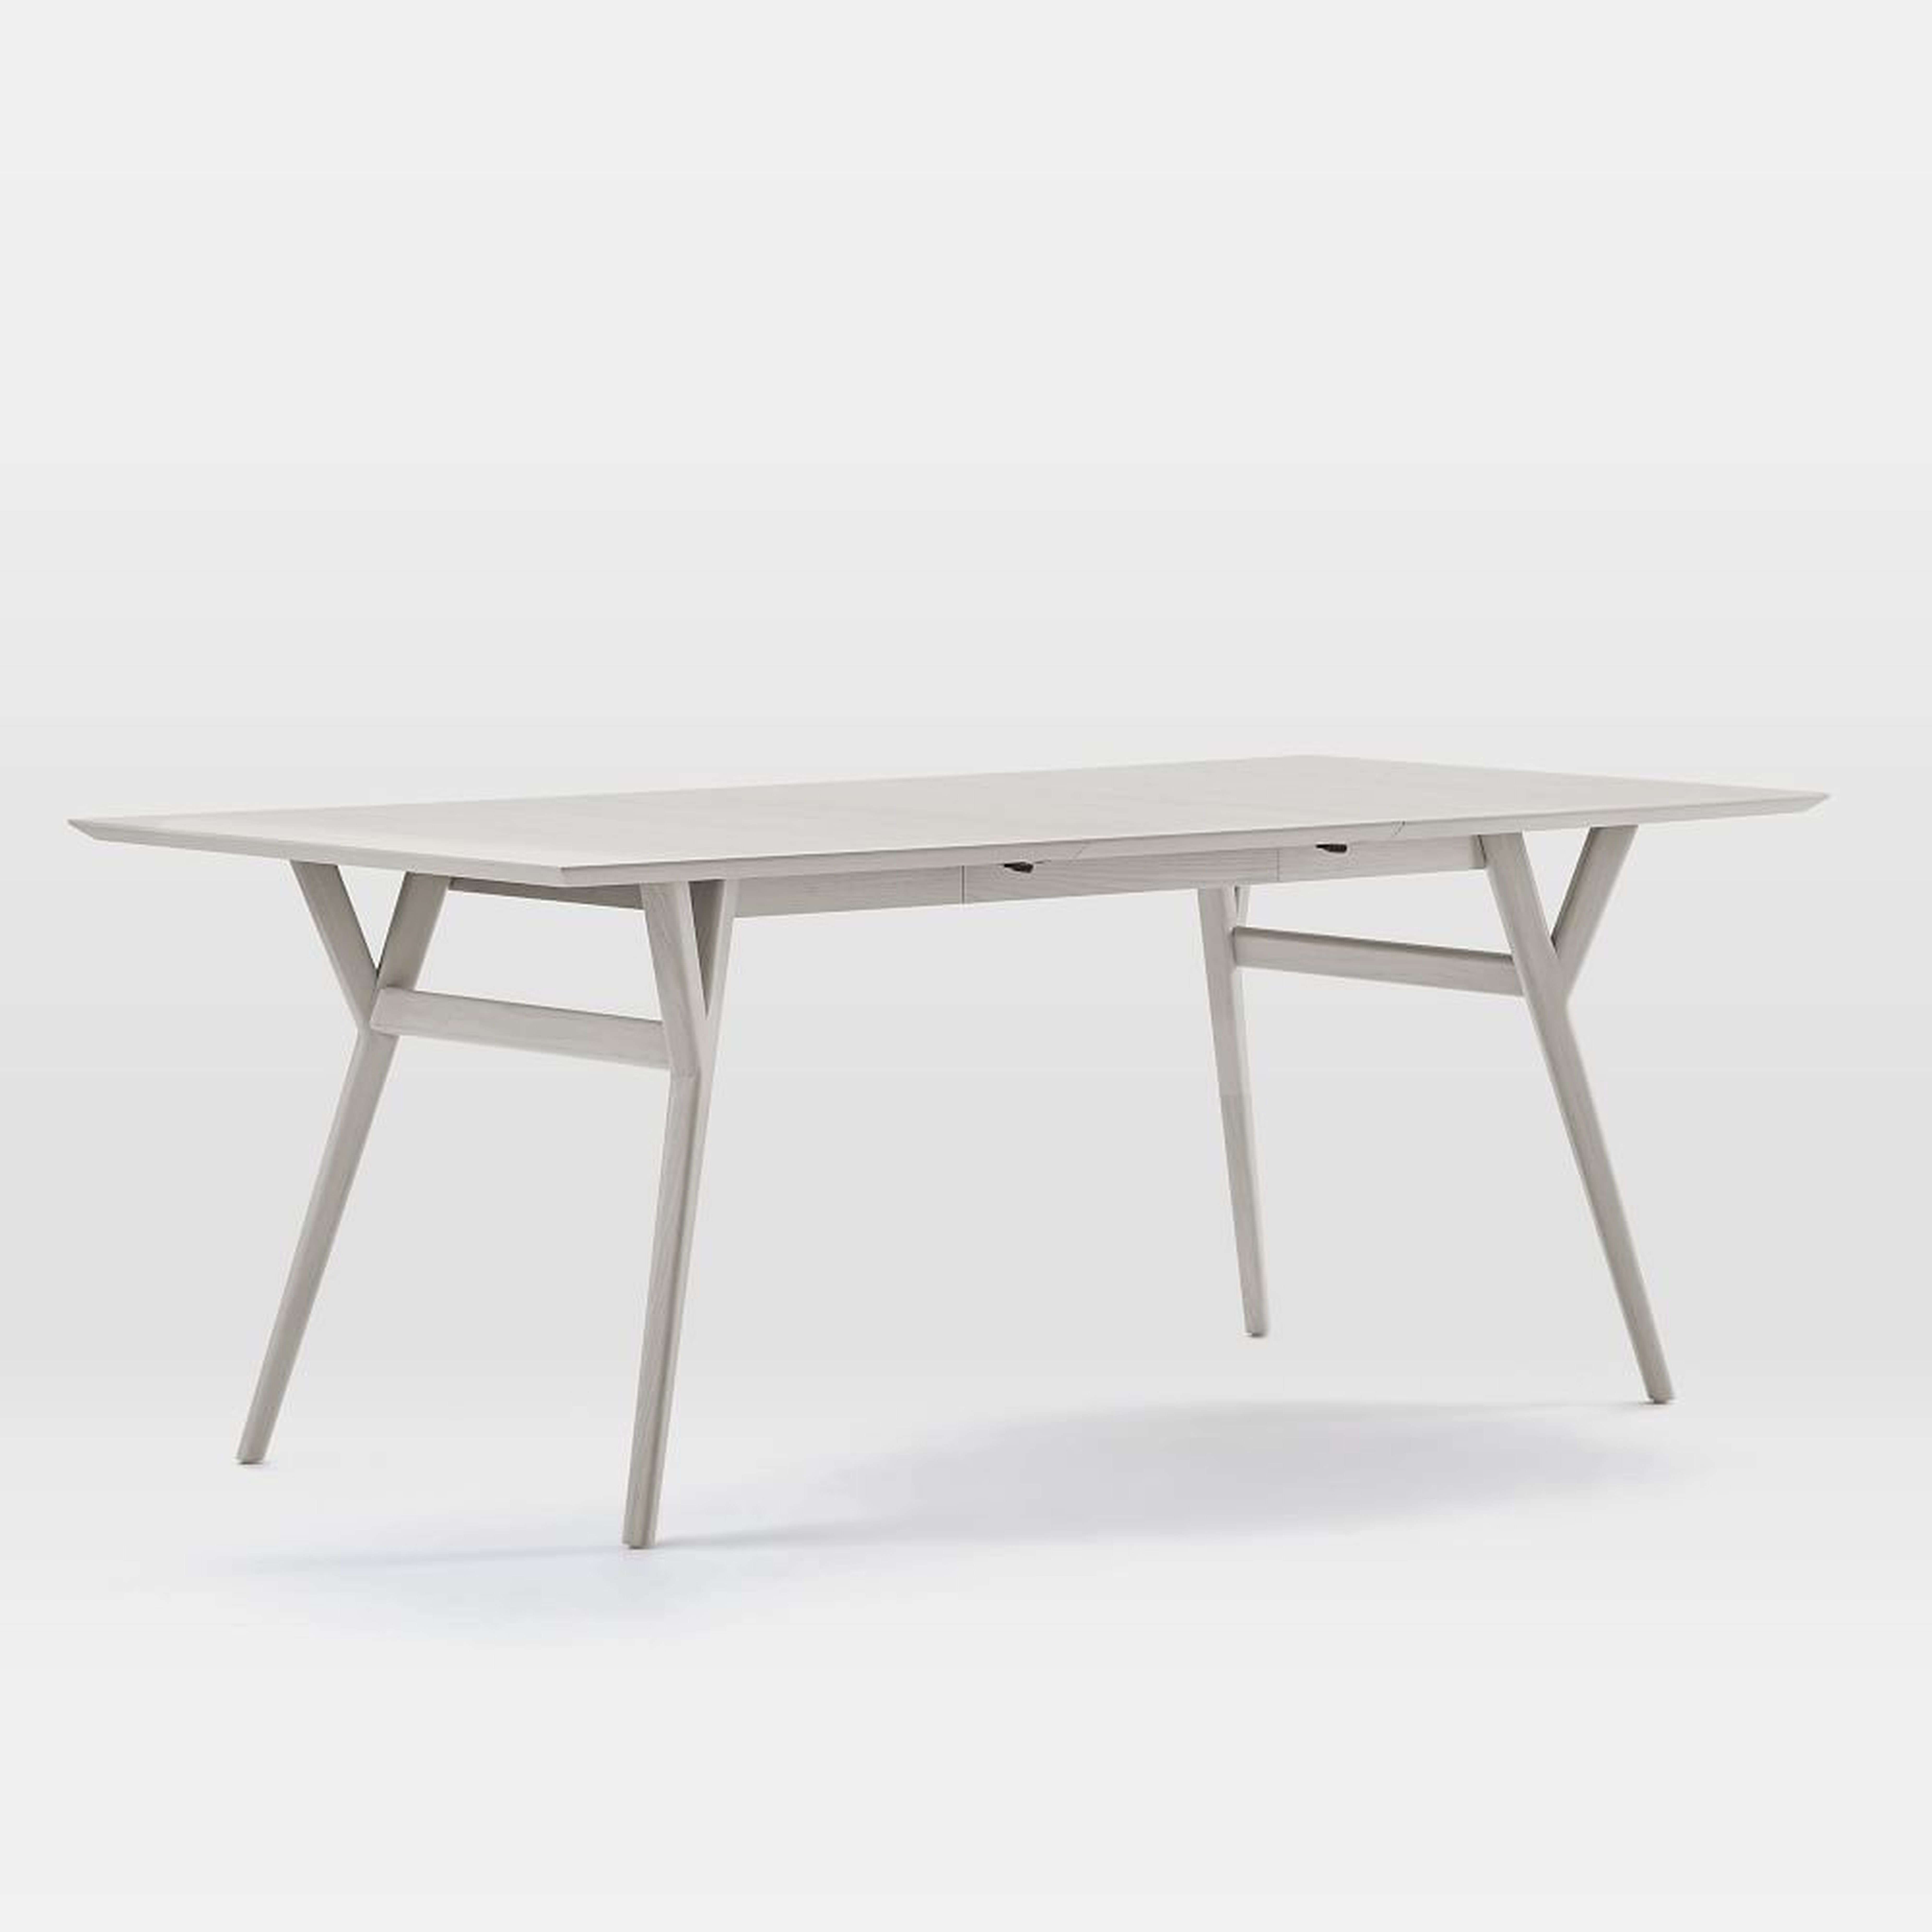 Mid-Century Expandable Dining Table, 60-80", Pebble - West Elm